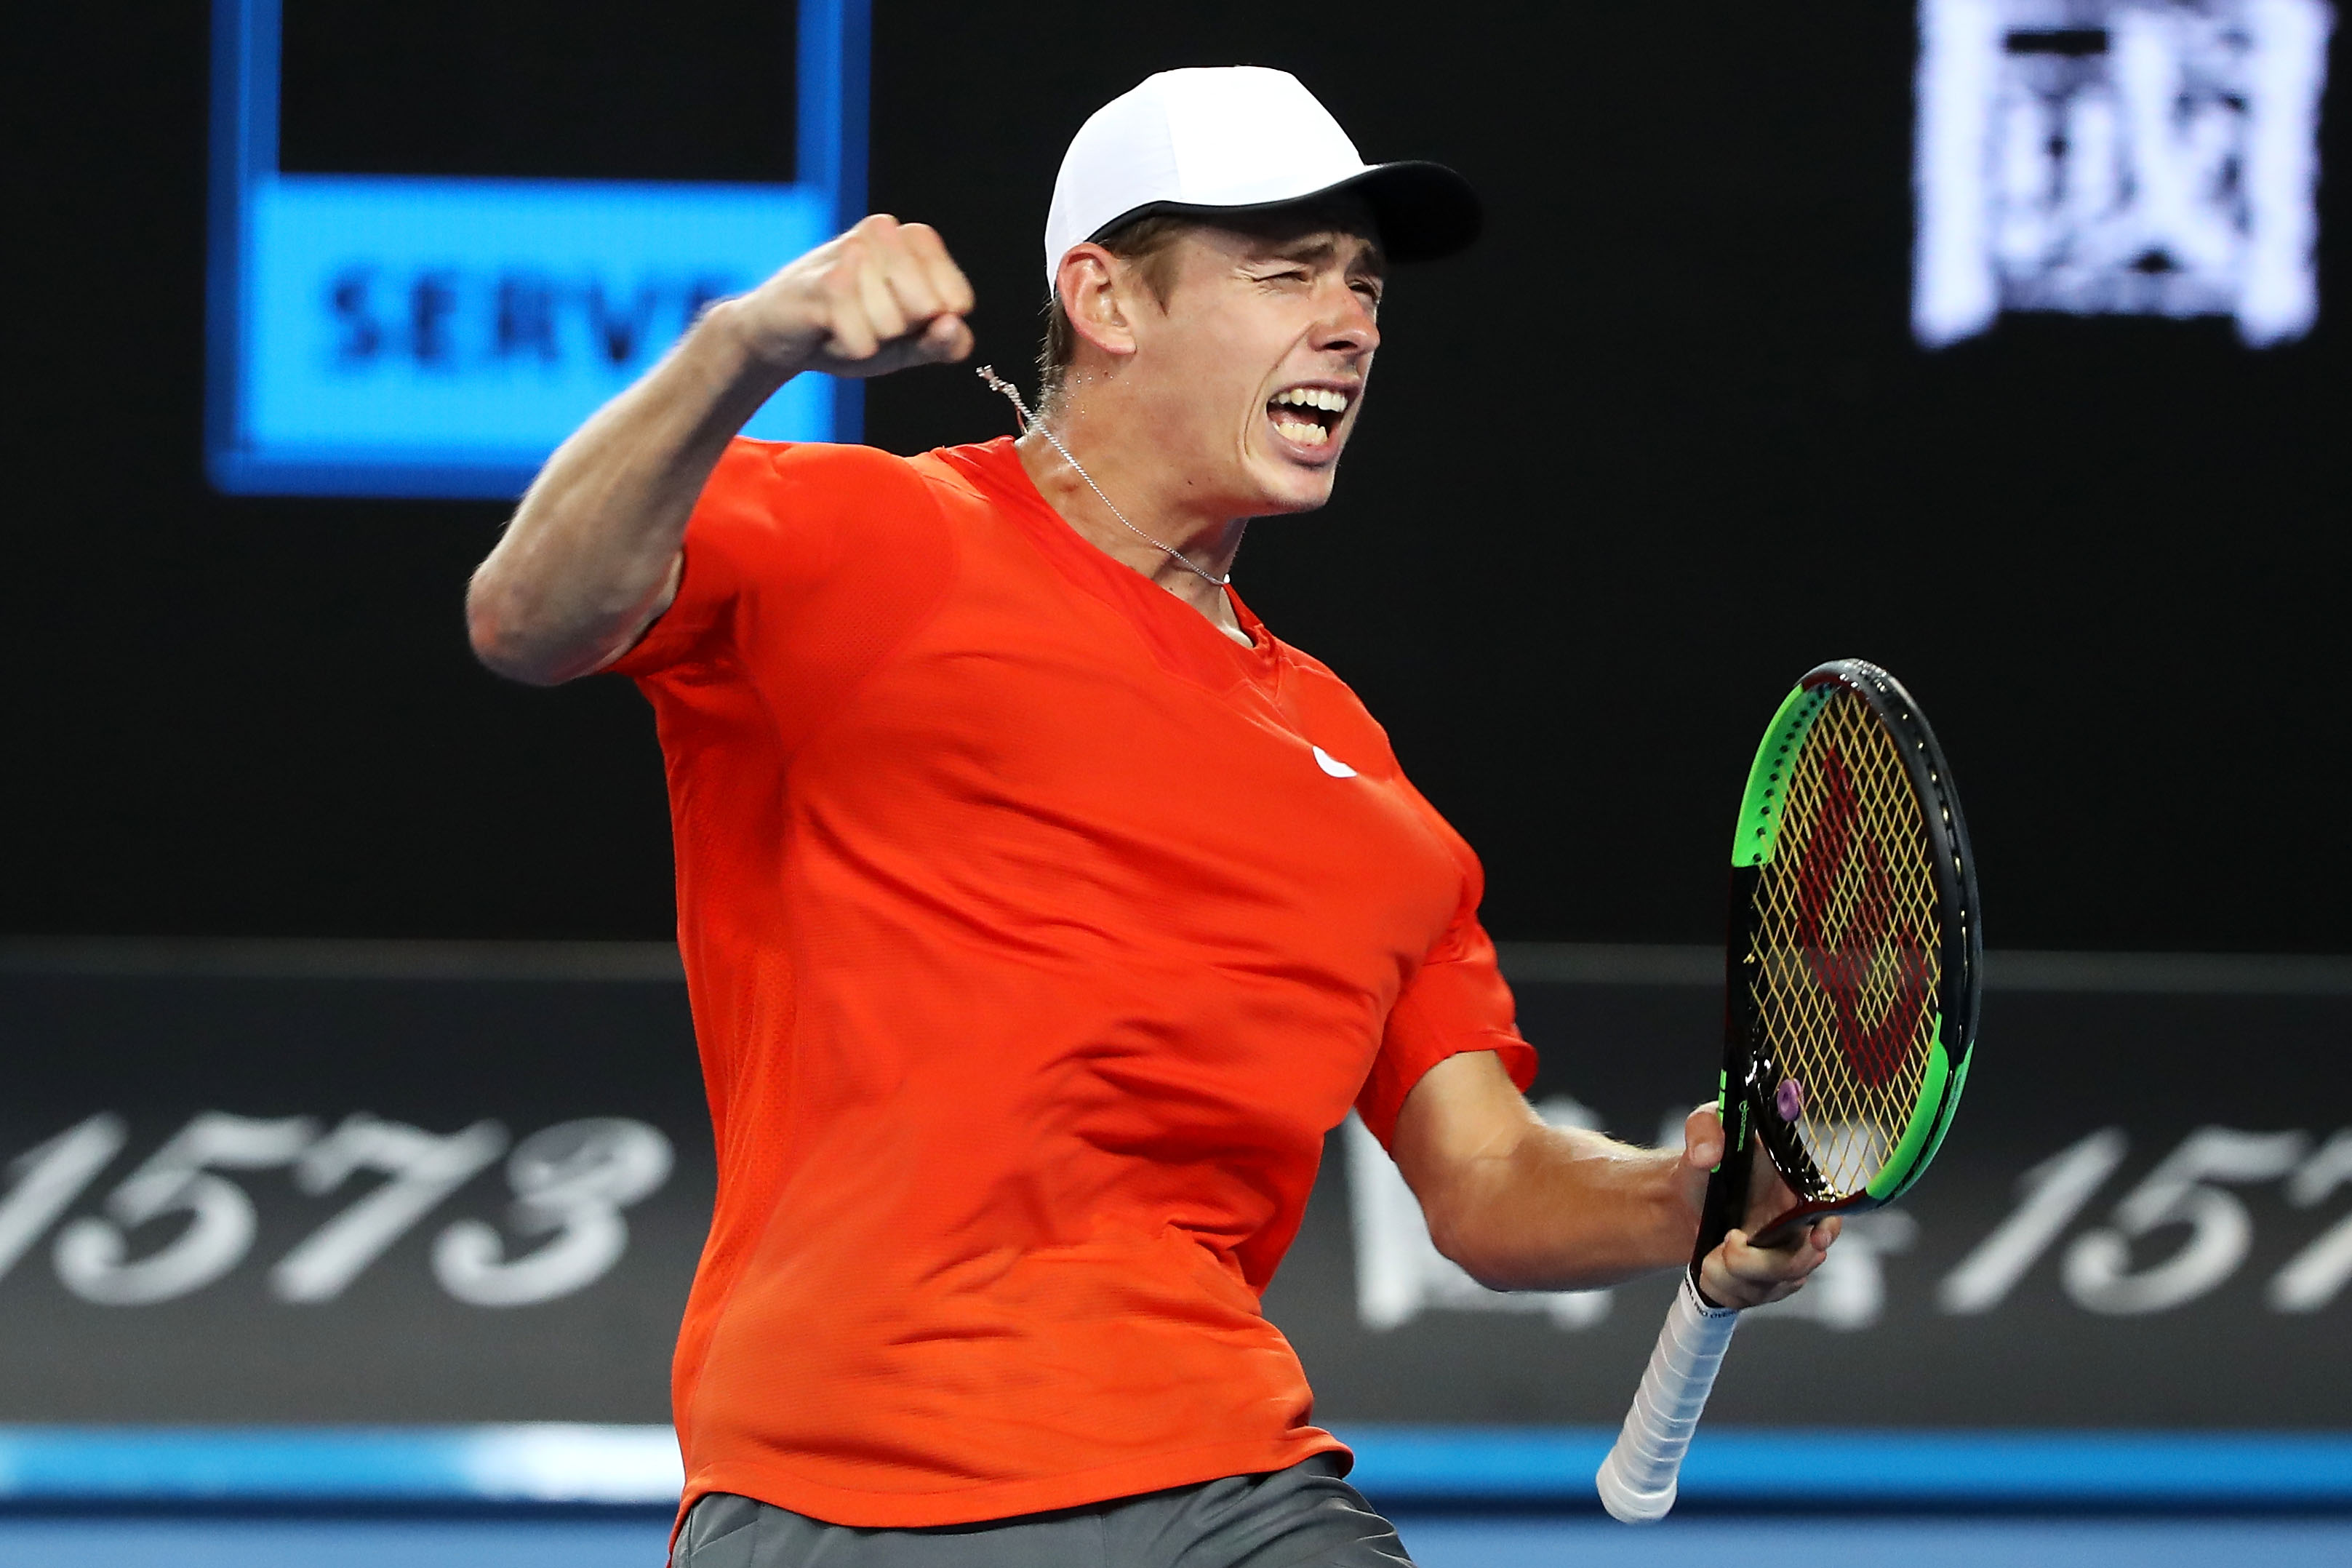 As player and person, theres more to Alex de Minaur than meets the eye